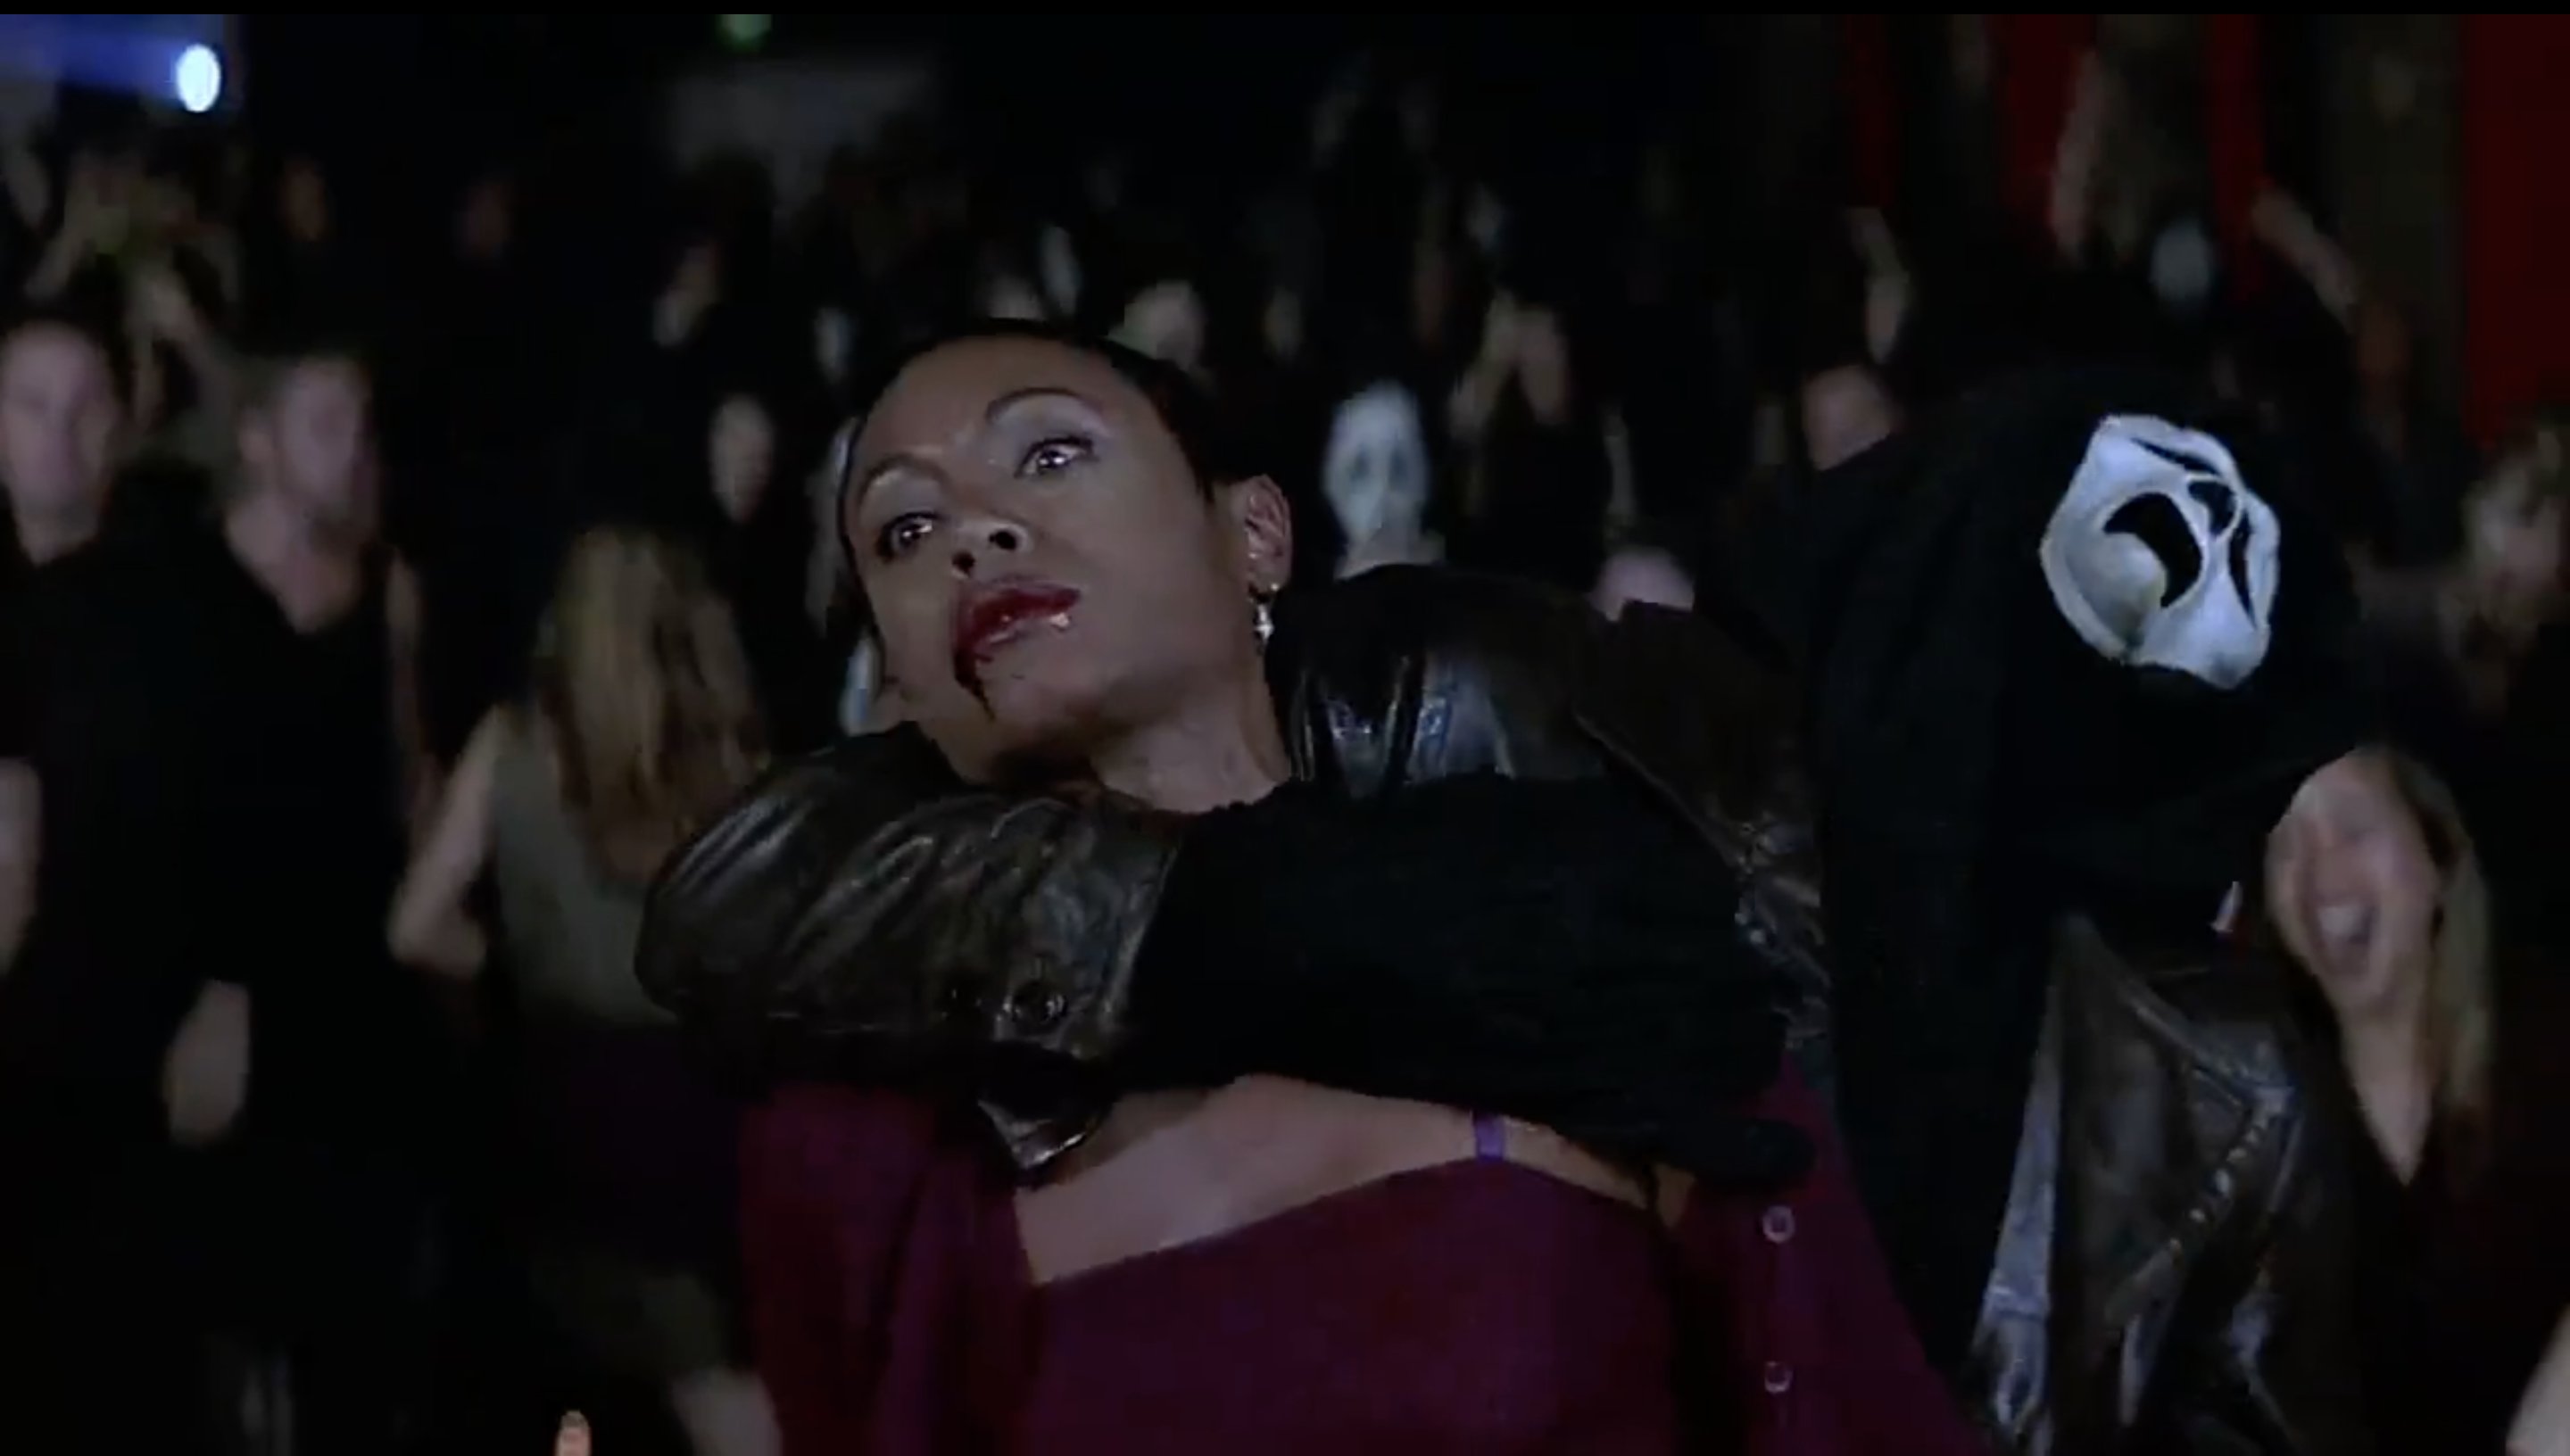 Jada Pinkett Smith gets stabbed by Ghostface in a movie theater